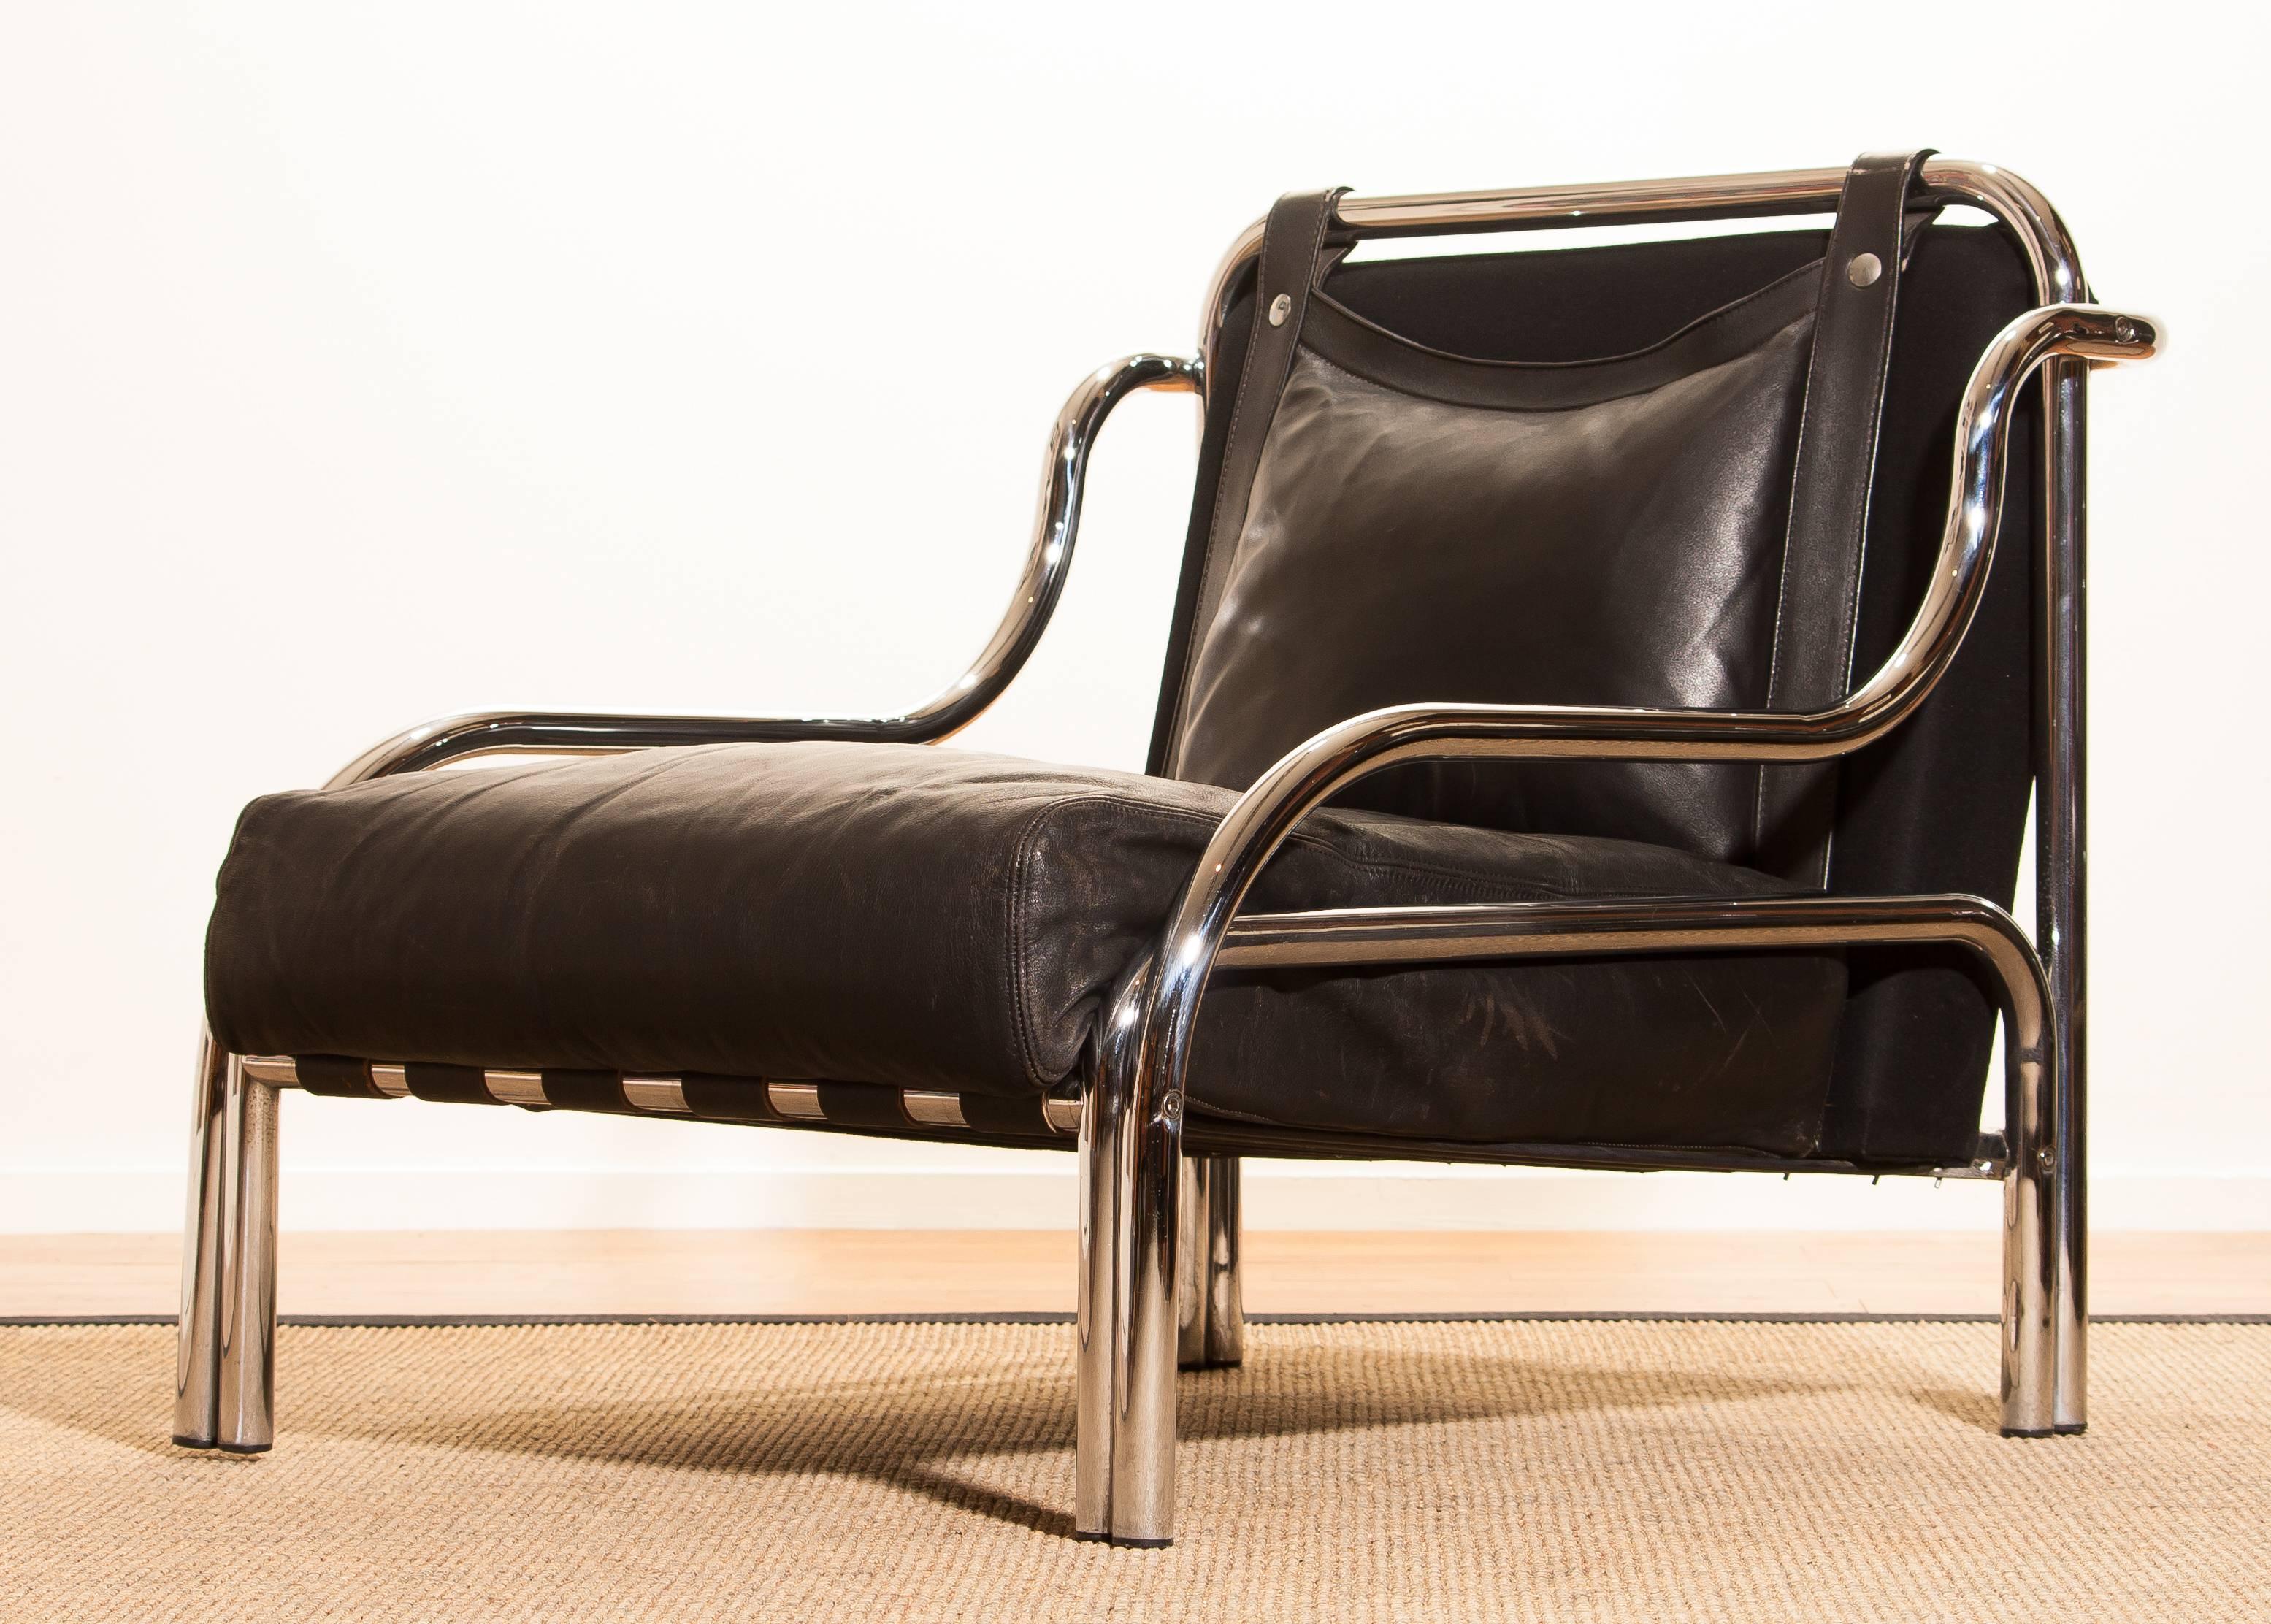 Italian 1960s, Leather and Chrome Lounge Chair by Gae Aulenti for Poltronova